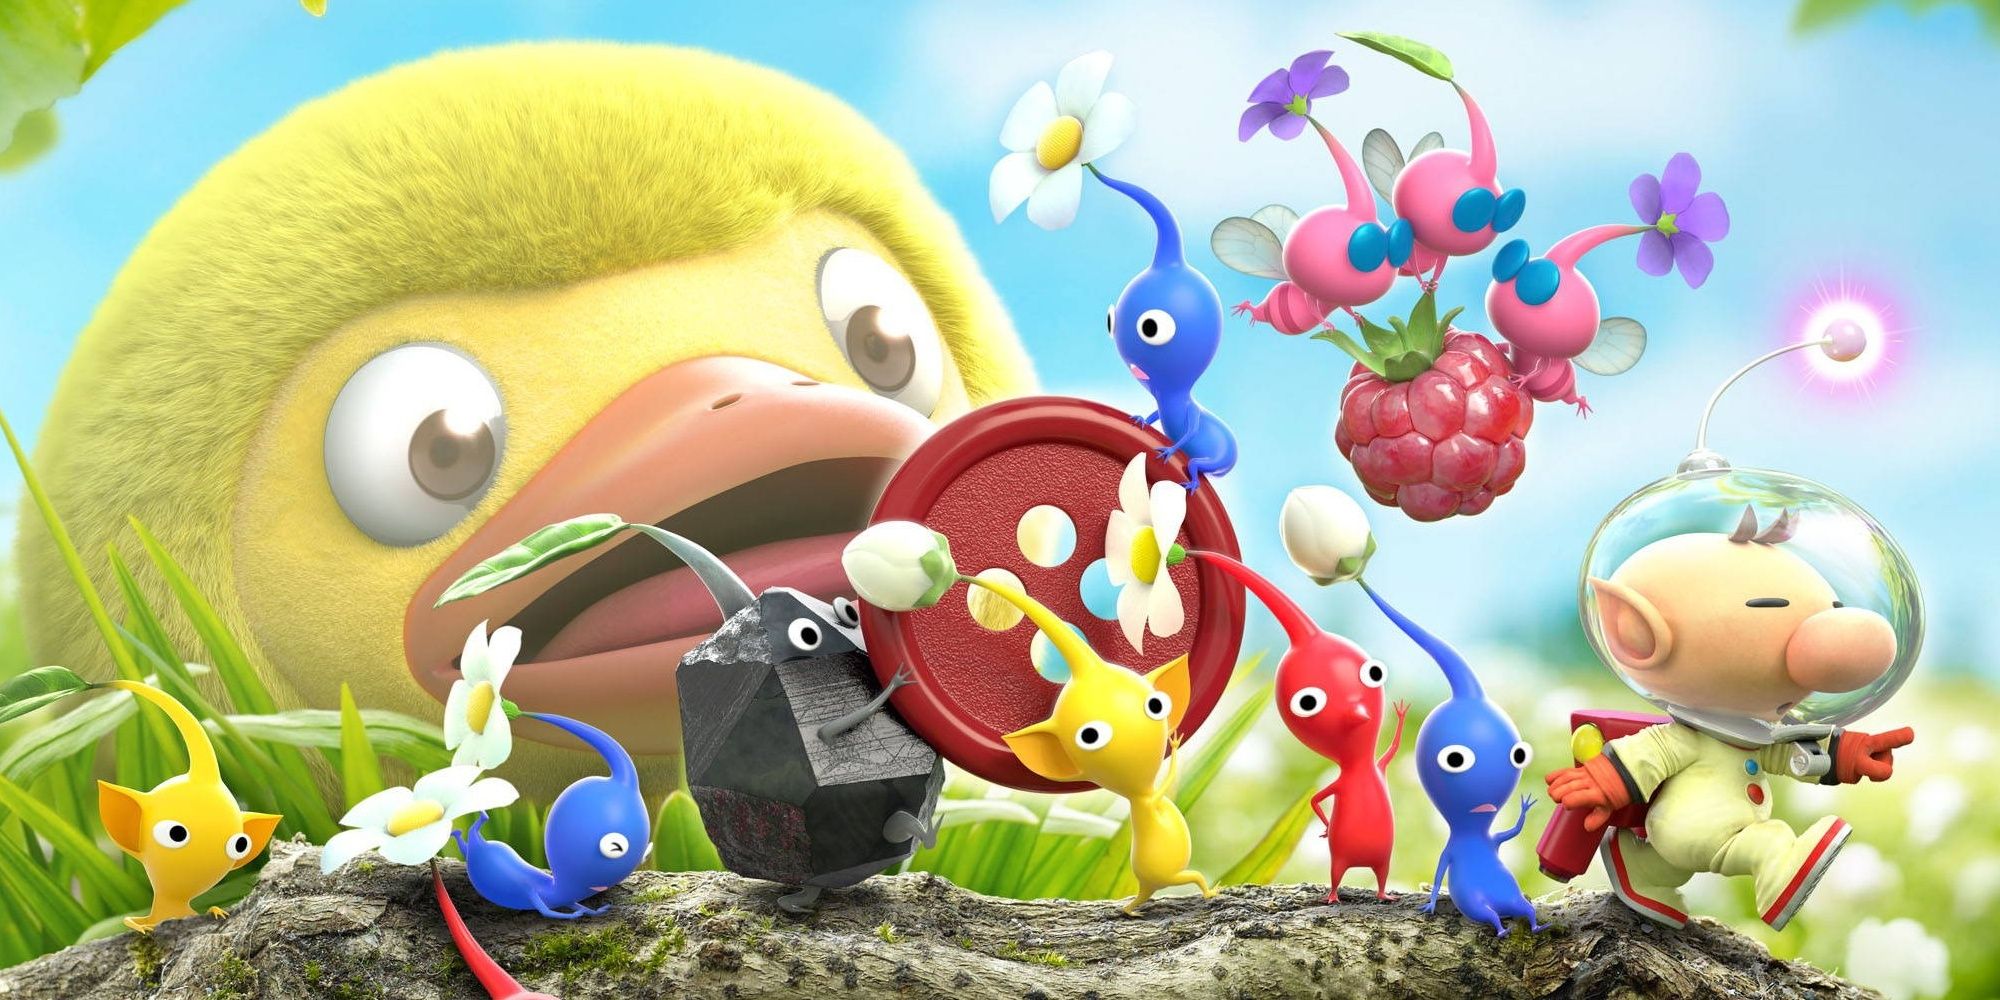 pikmin and Olimar marching on a branch